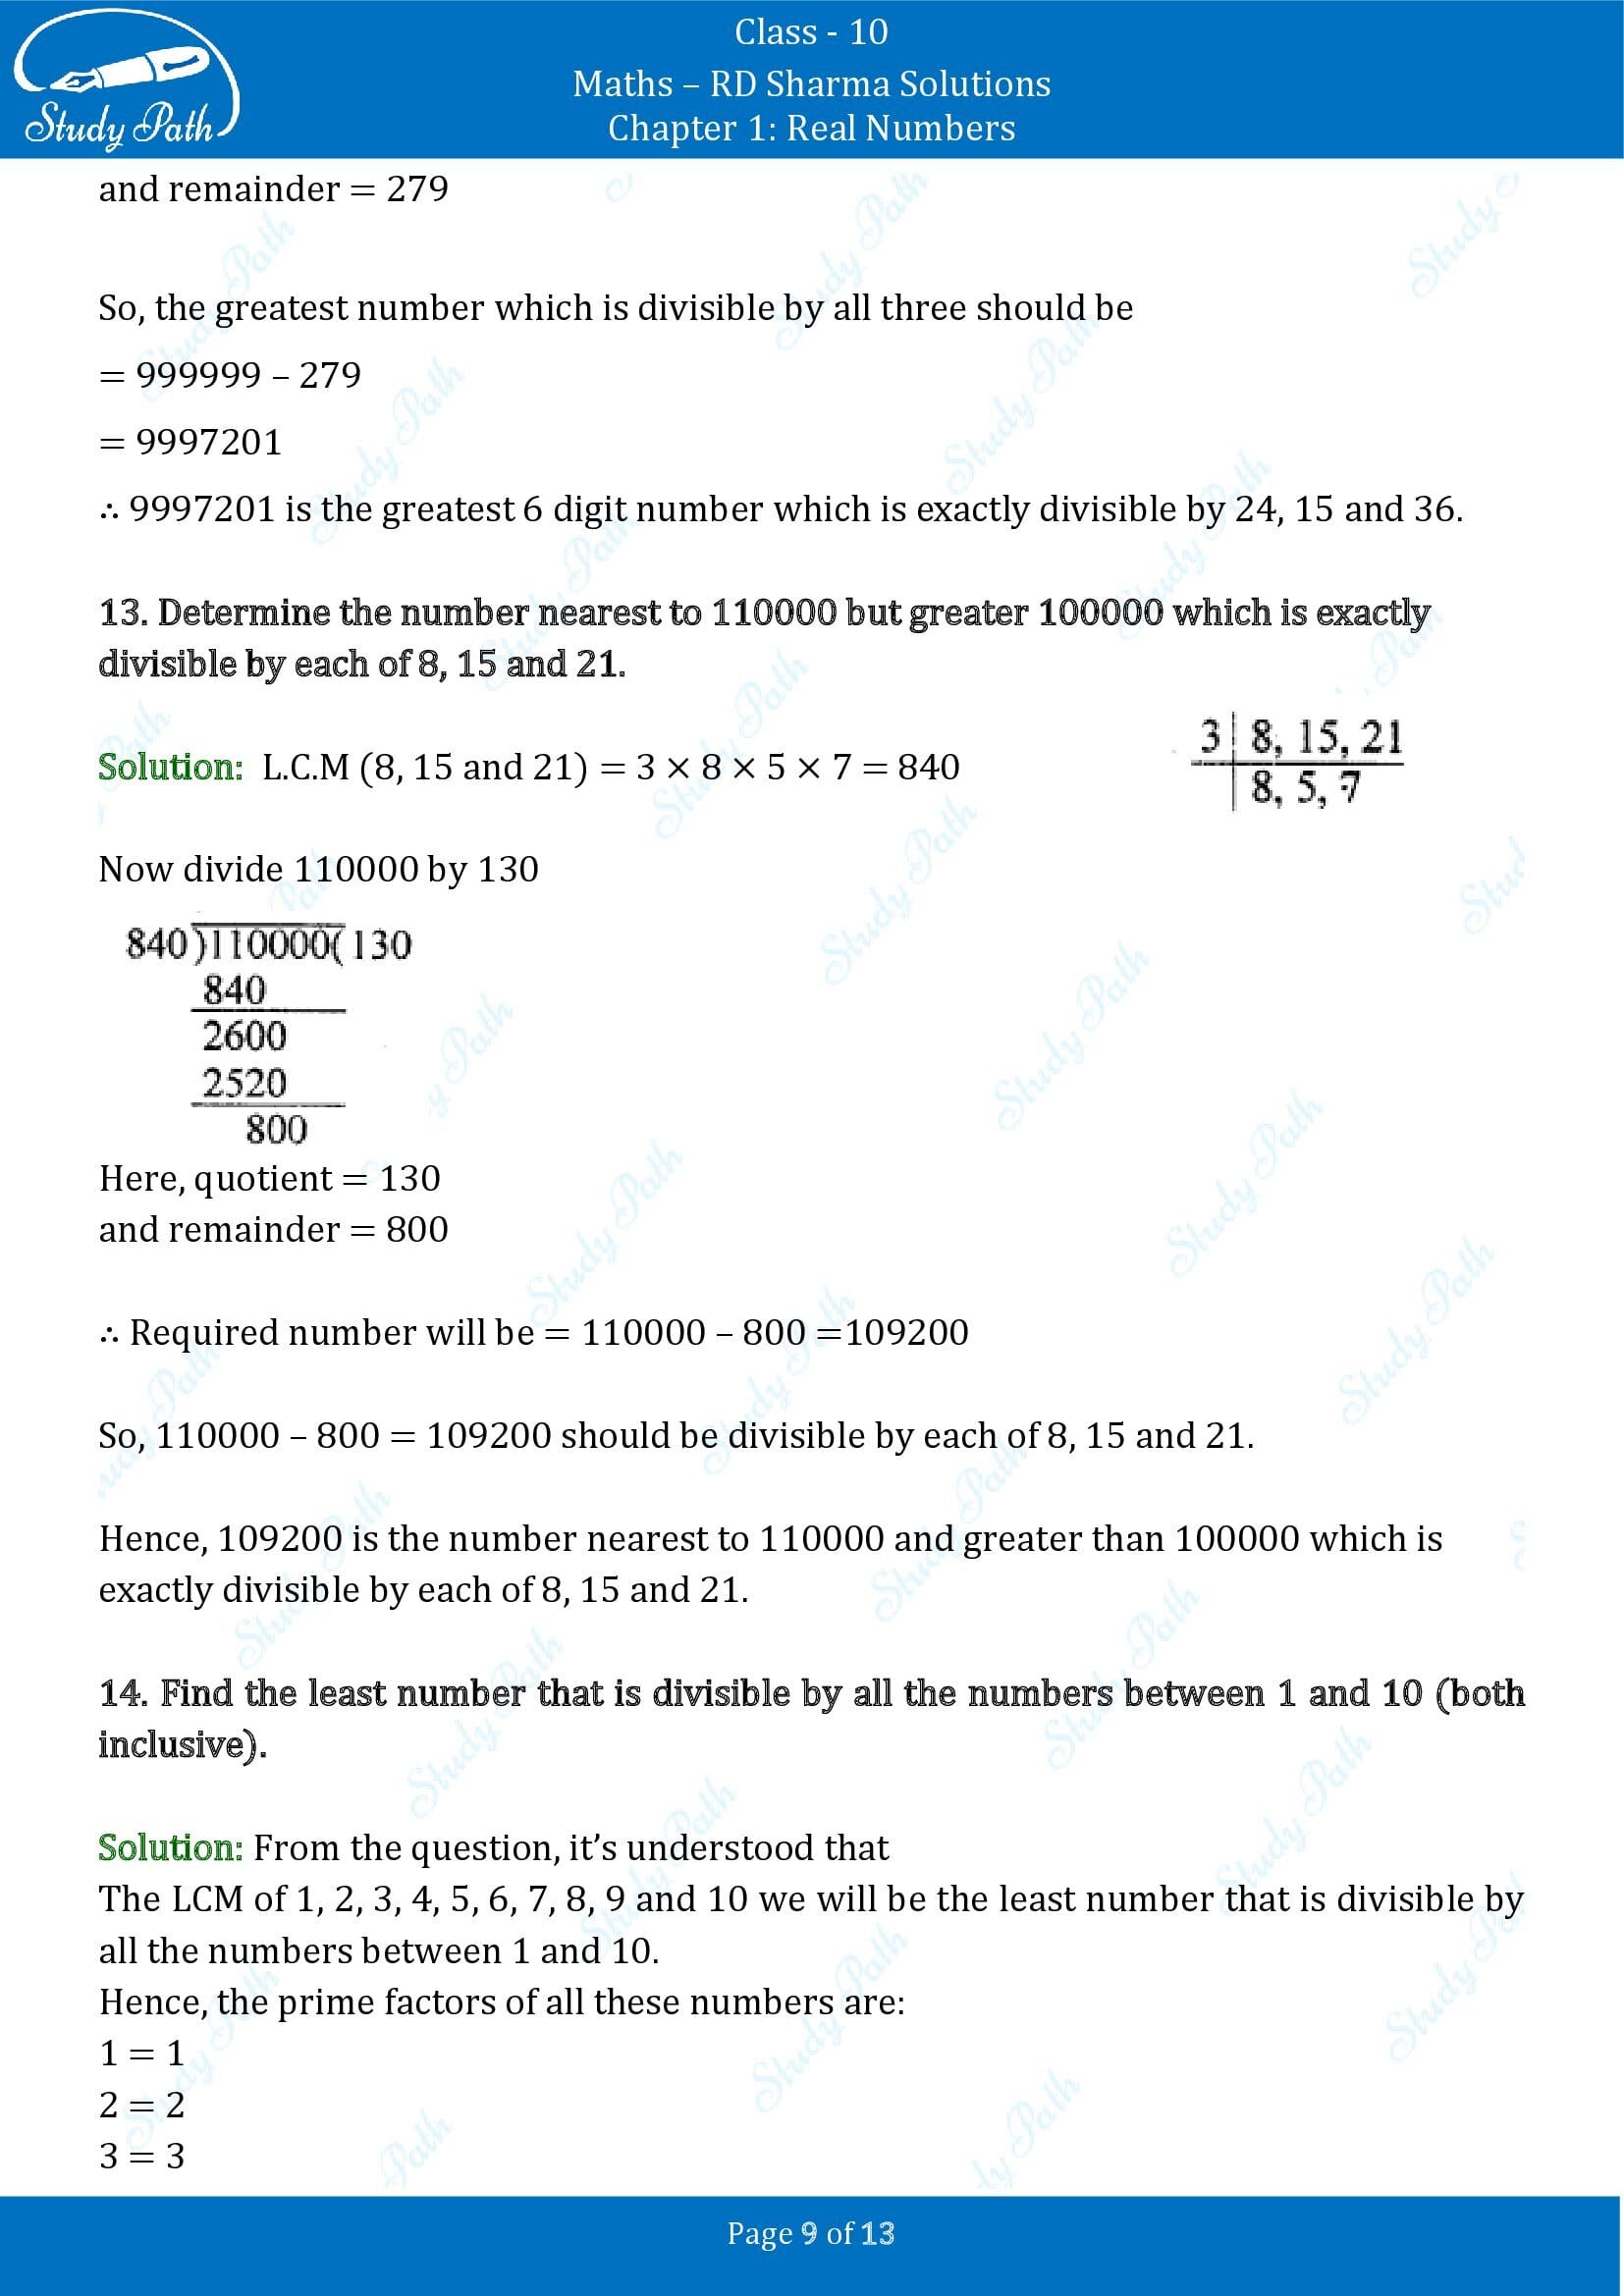 RD Sharma Solutions Class 10 Chapter 1 Real Numbers Exercise 1.4 00009